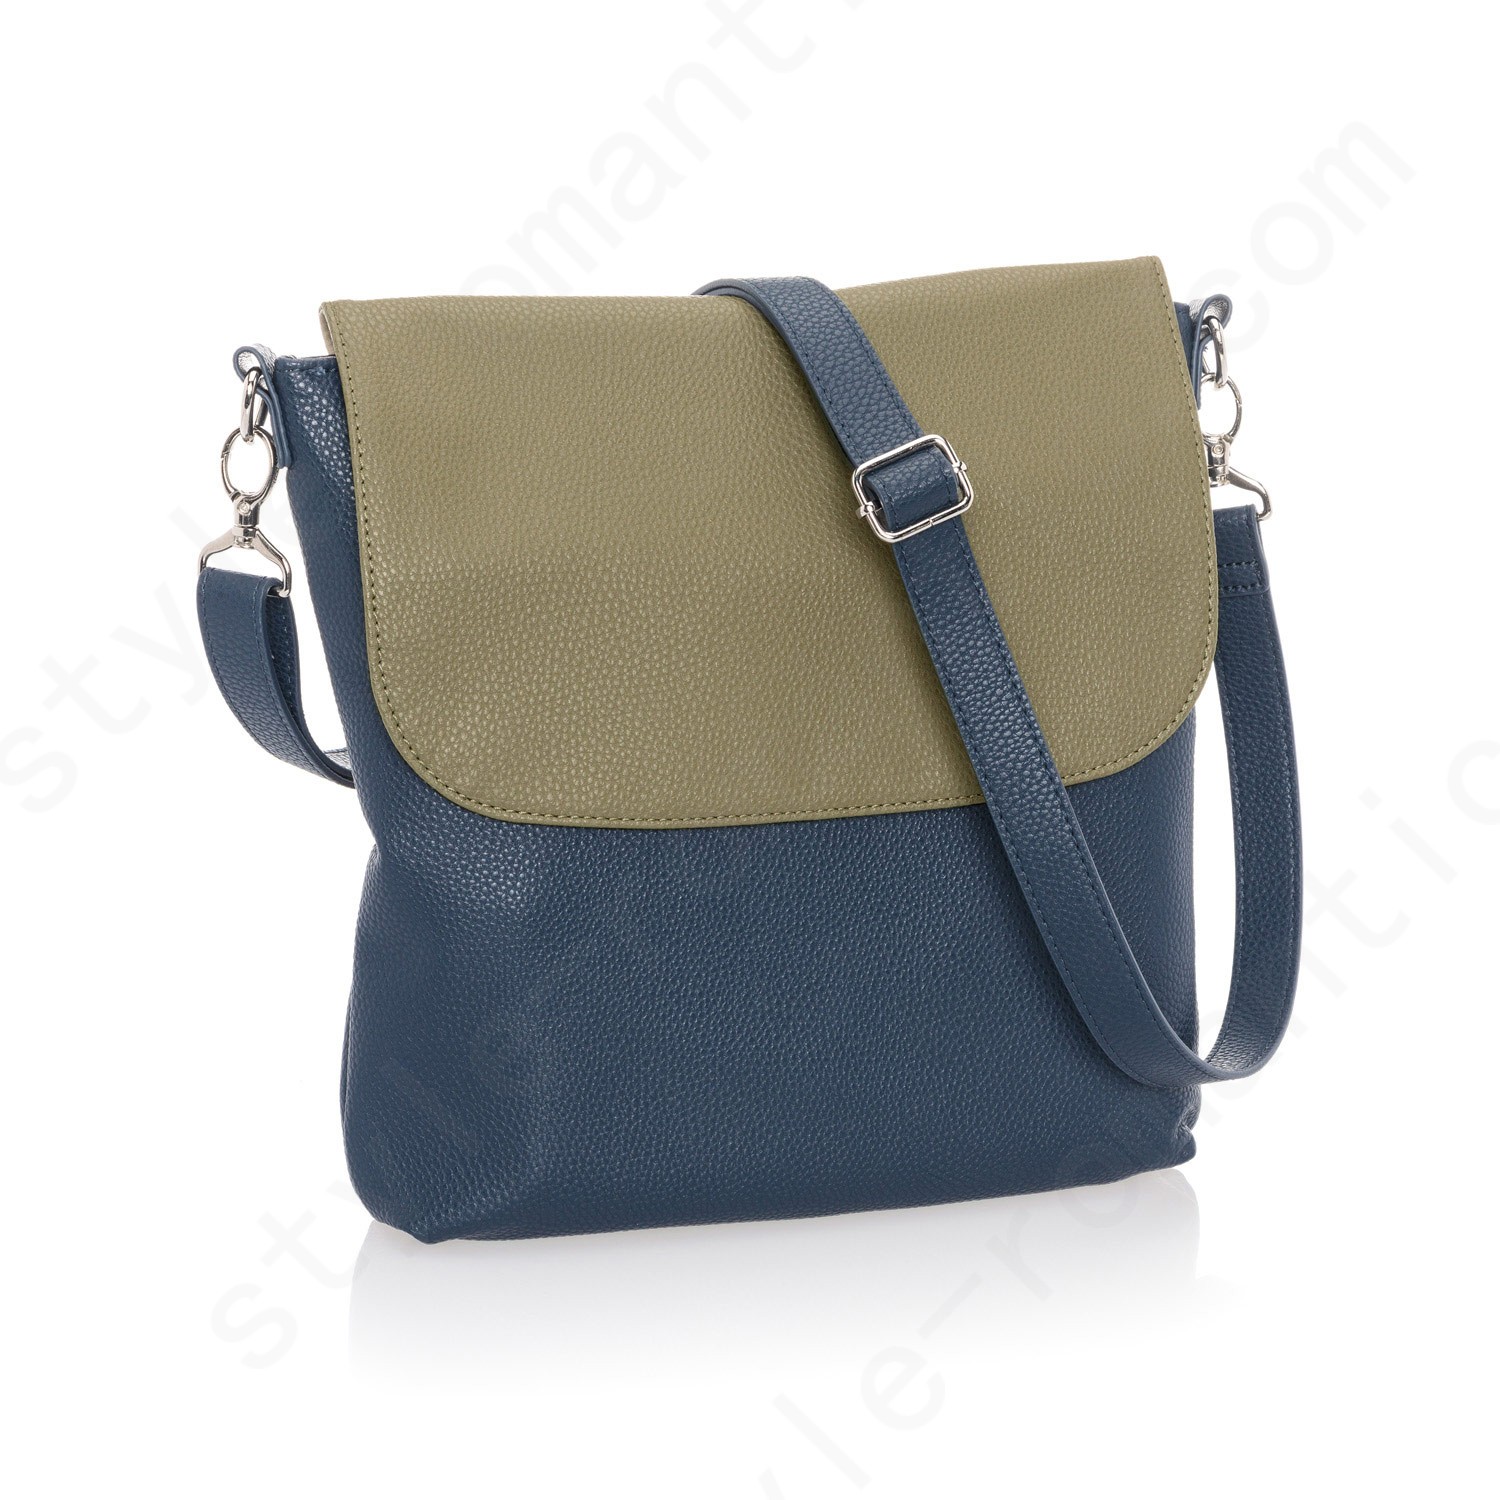 Thirty-One Gifts Studio Thirty-One Modern - Midnight Navy Pebble W/ Ooh-La-La Olive Pebble Bags Accessories - Thirty-One Gifts Studio Thirty-One Modern - Midnight Navy Pebble W/ Ooh-La-La Olive Pebble Bags Accessories